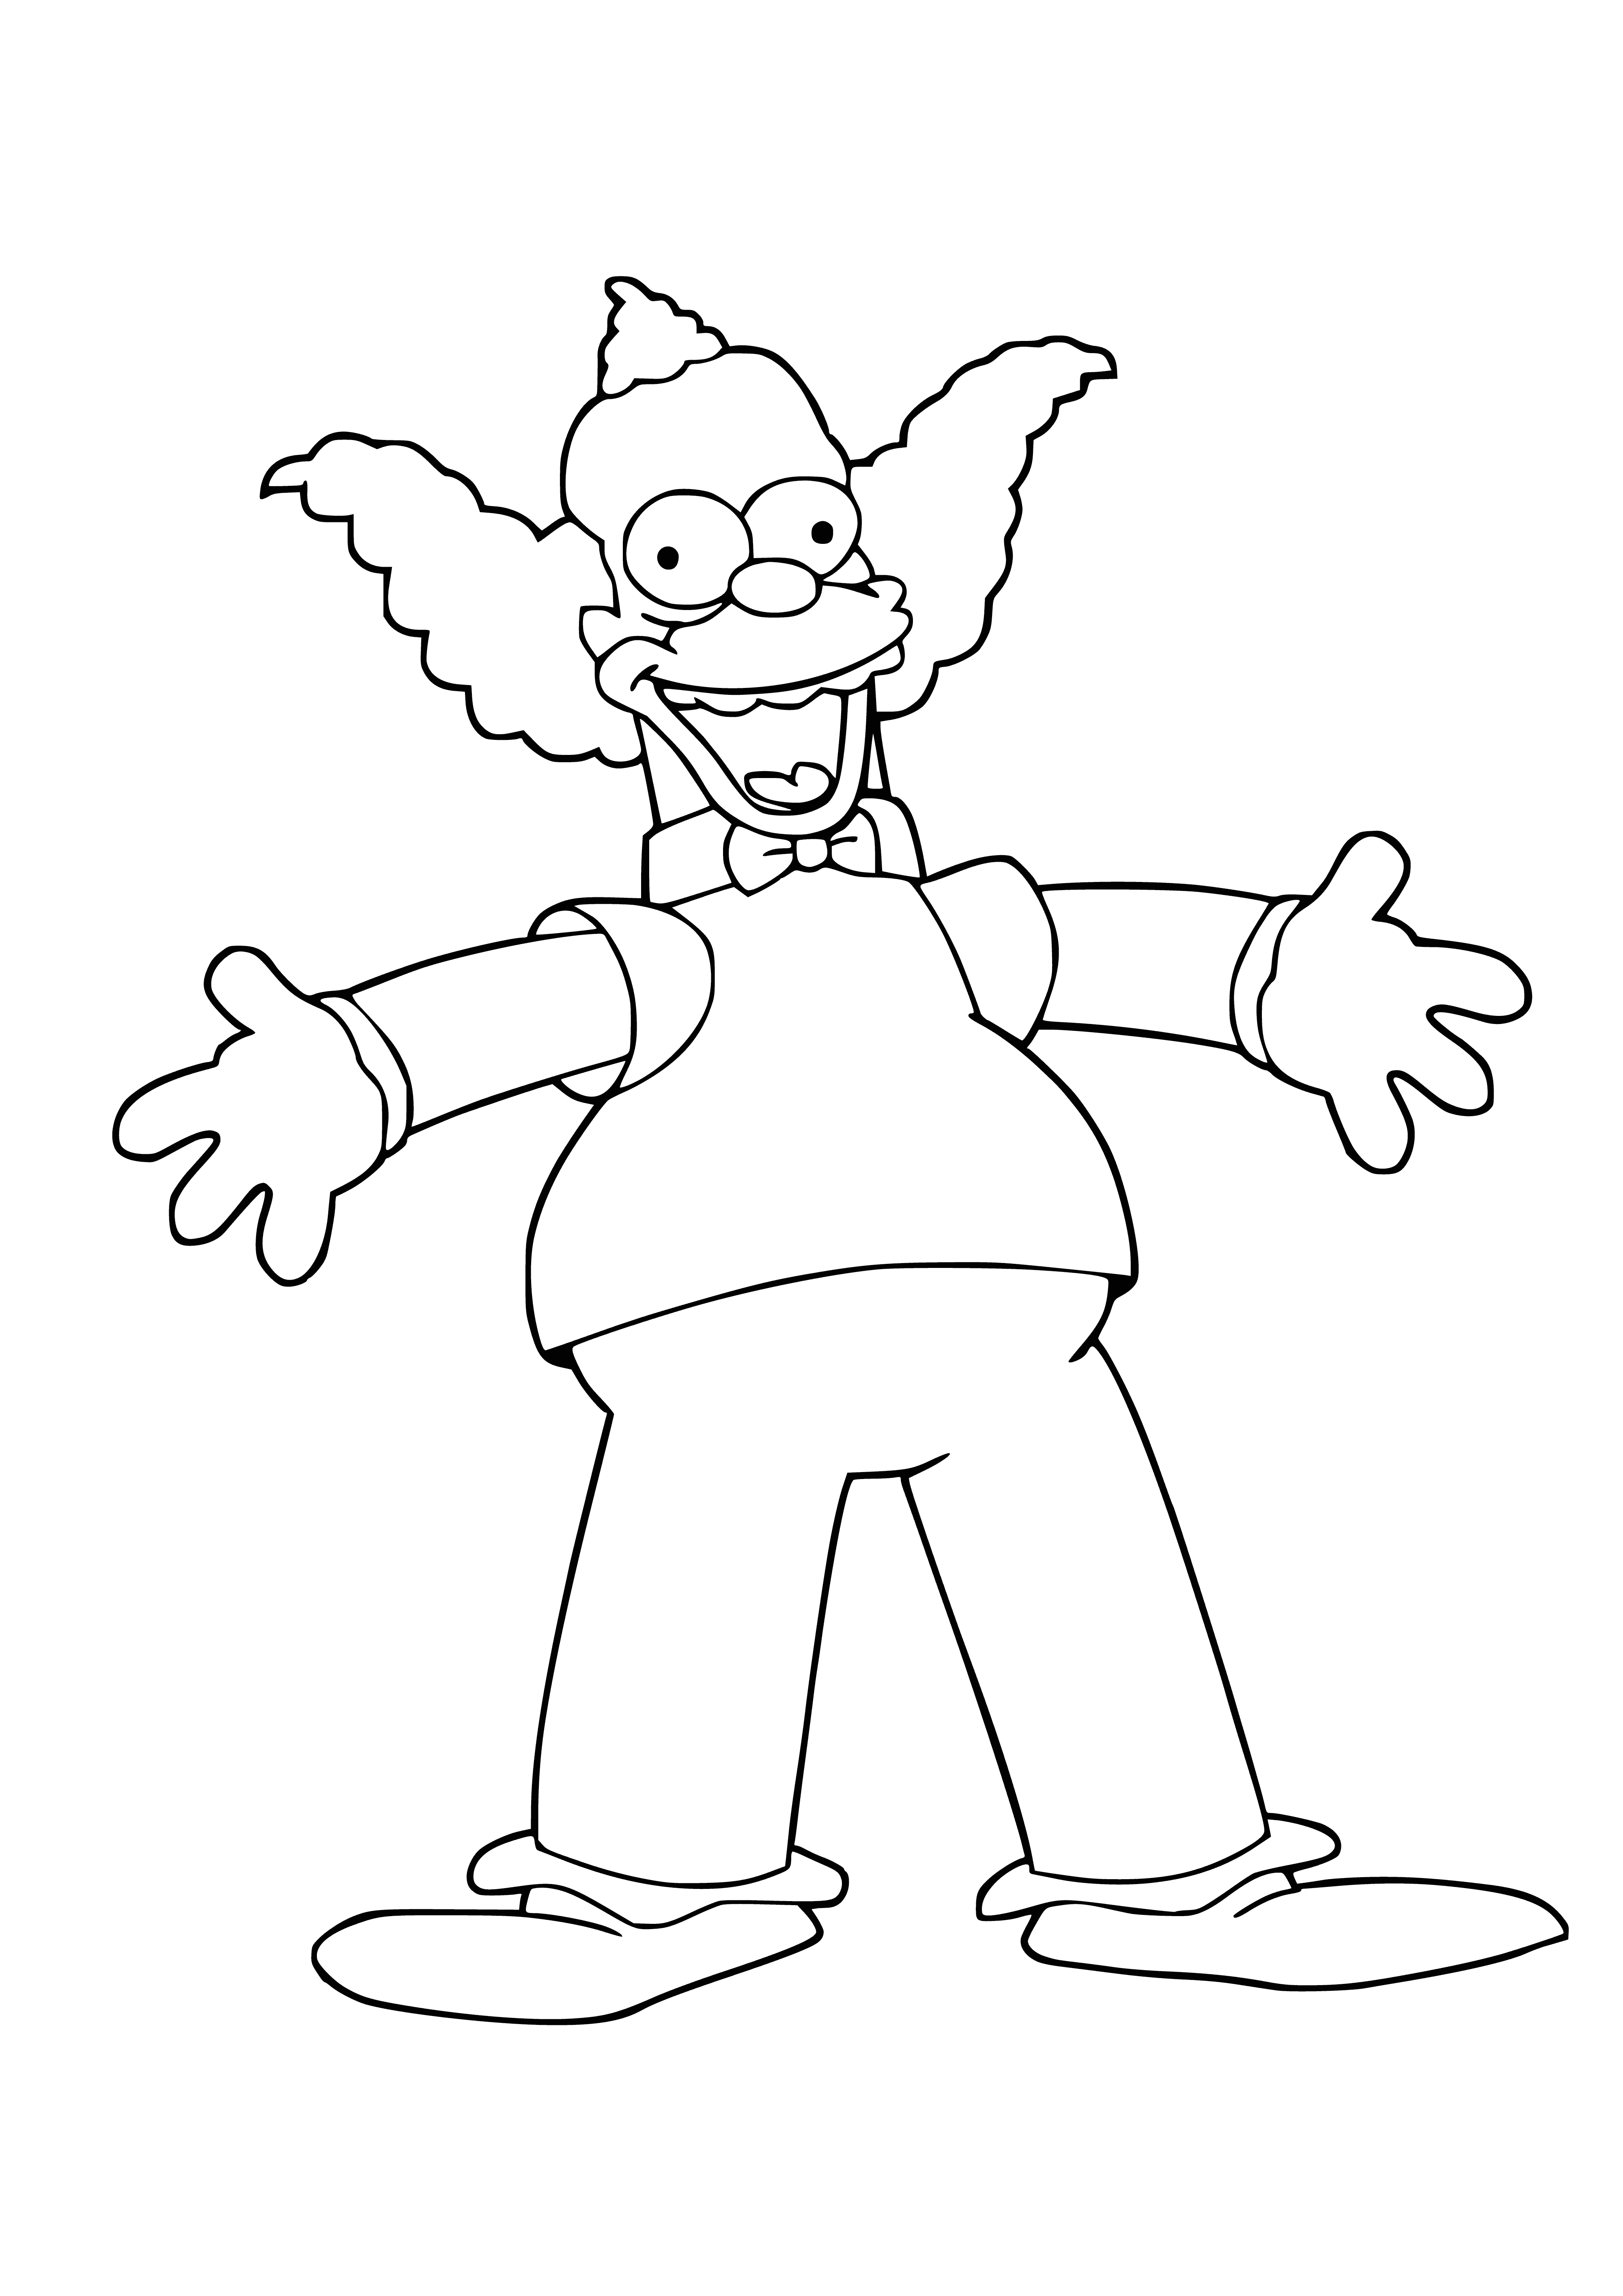 coloring page: Krusty the Clown joyfully entertains a cheering crowd in a bright red suit, holding a microphone and with a big red nose.